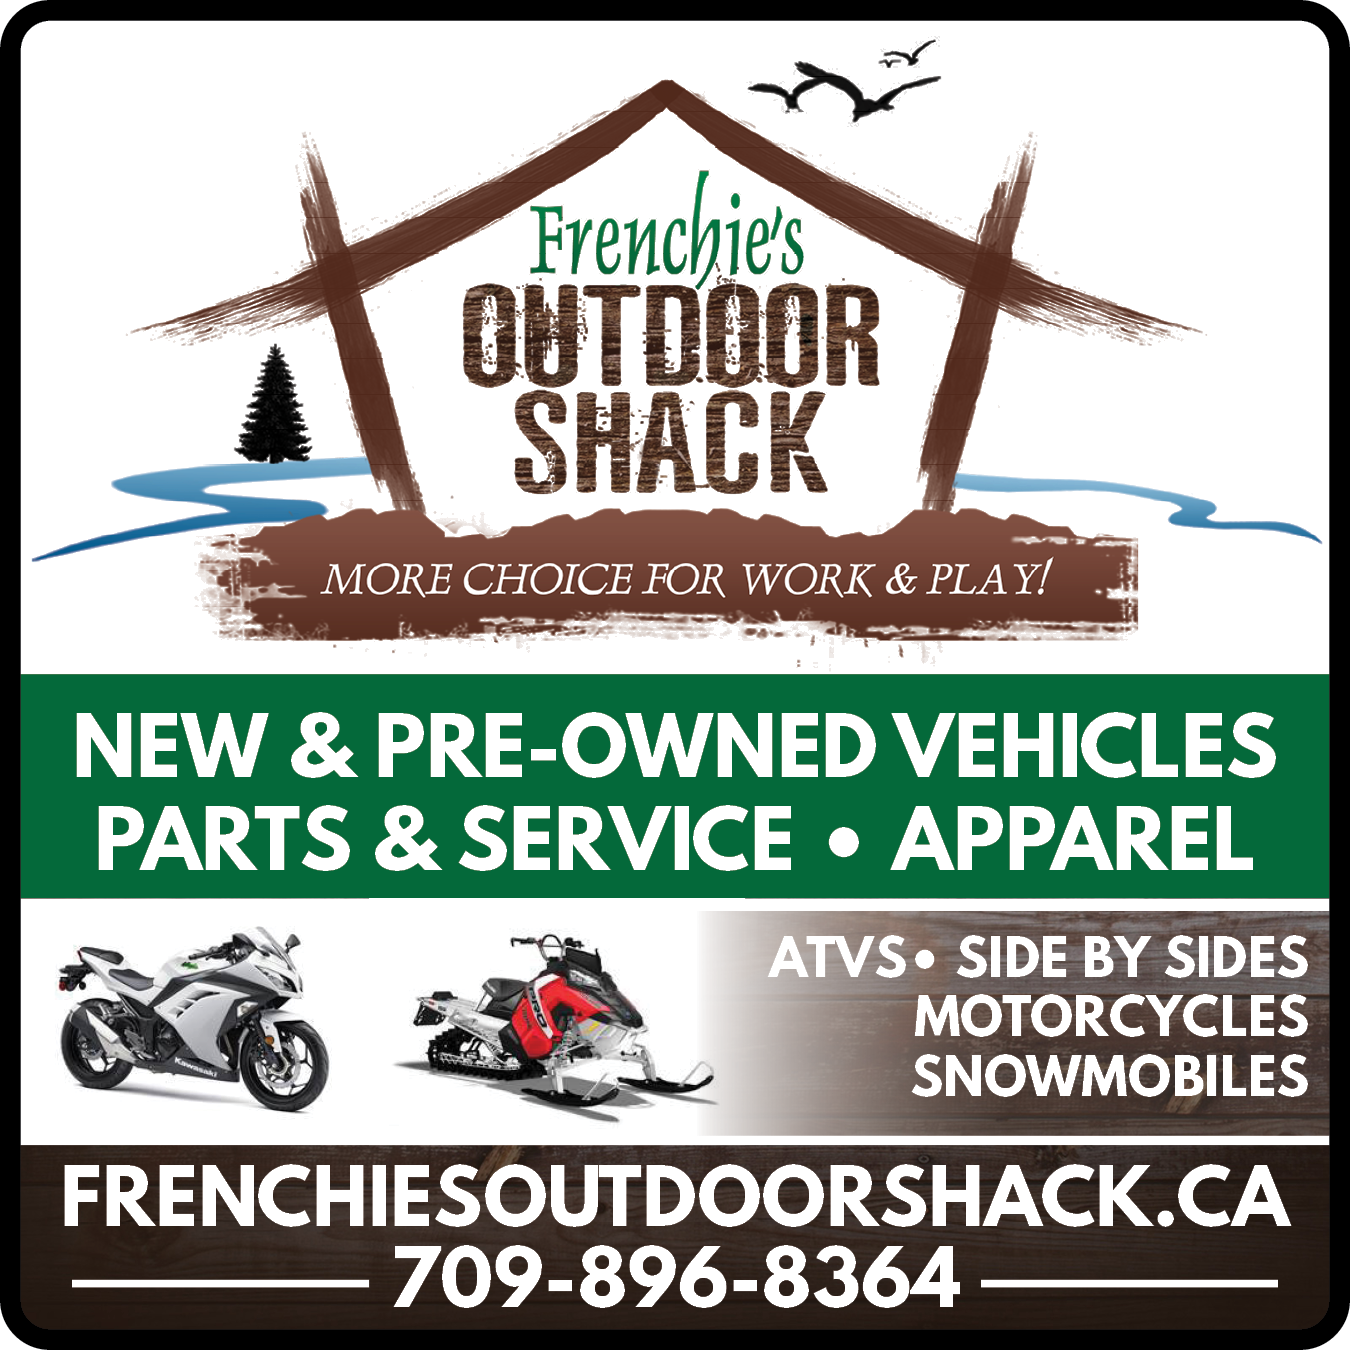 Frenchie's Outdoor Shack